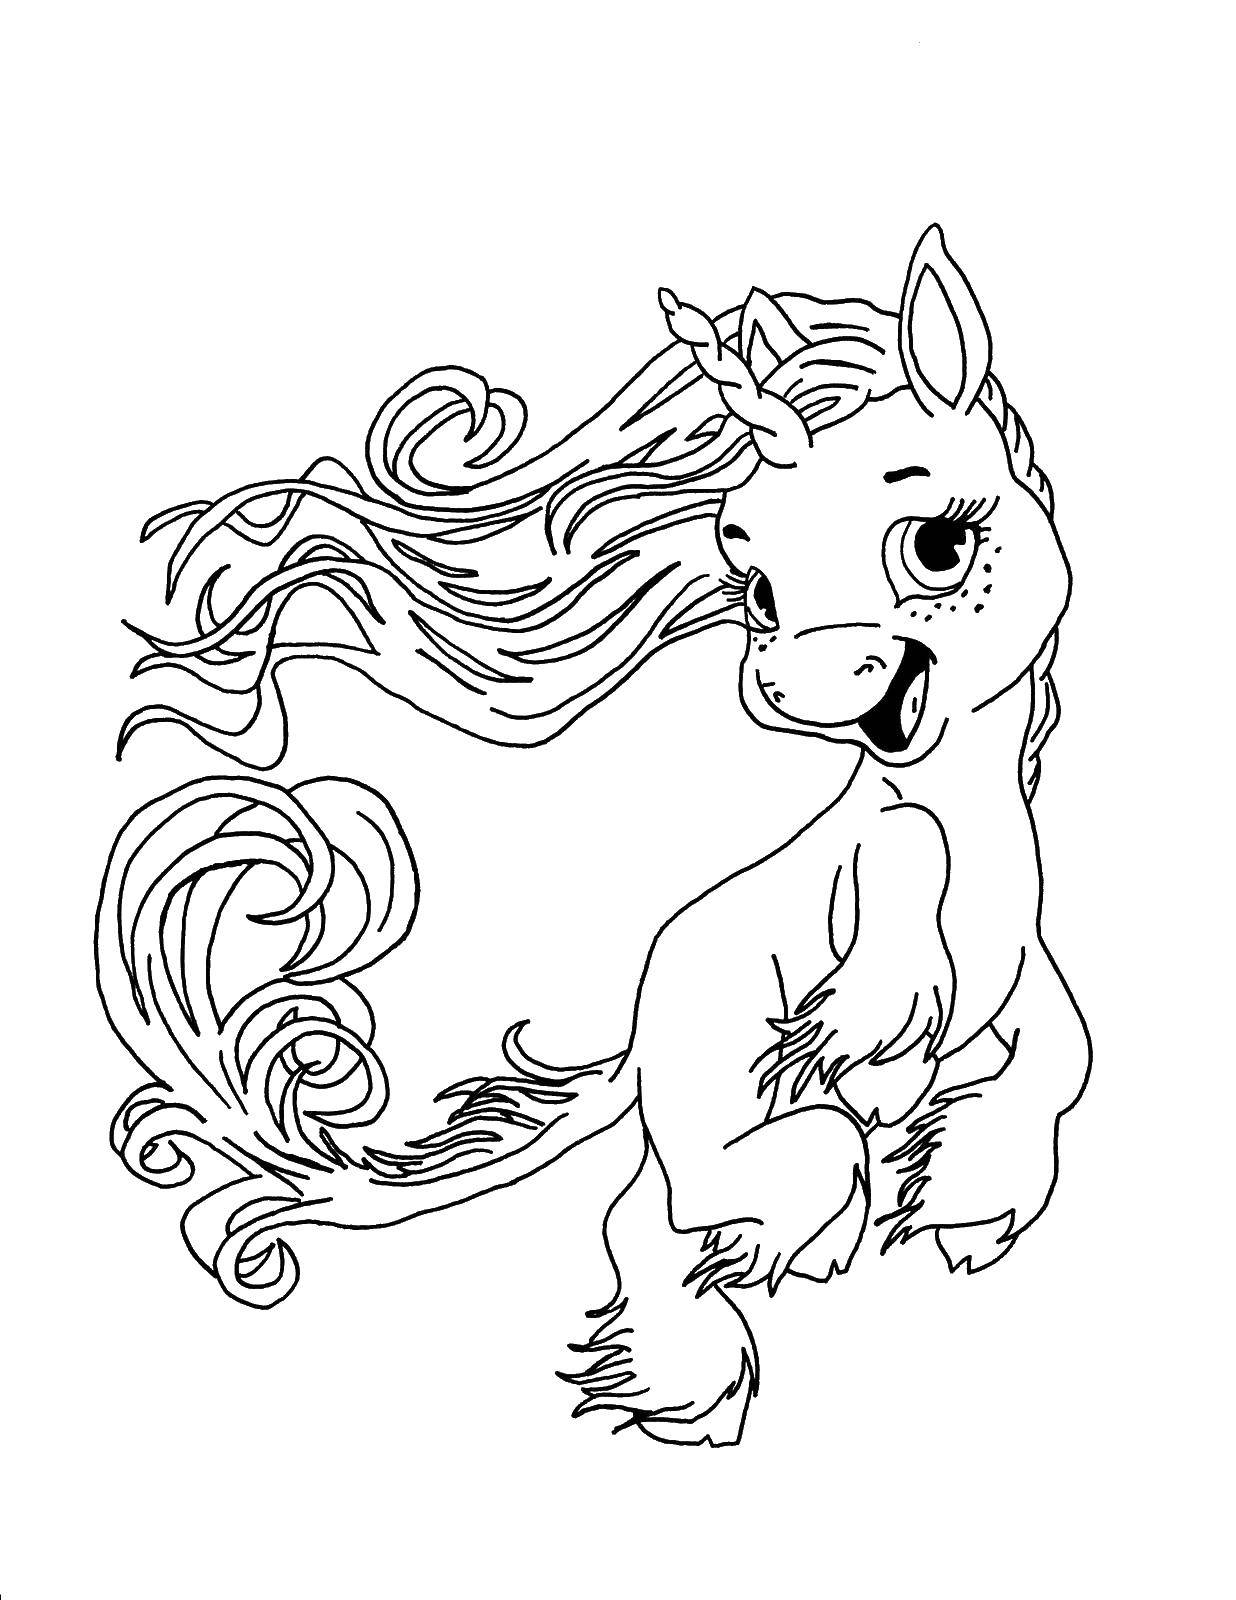 Coloring Little unicorn with a tail. Category coloring. Tags:  unicorn, tail.